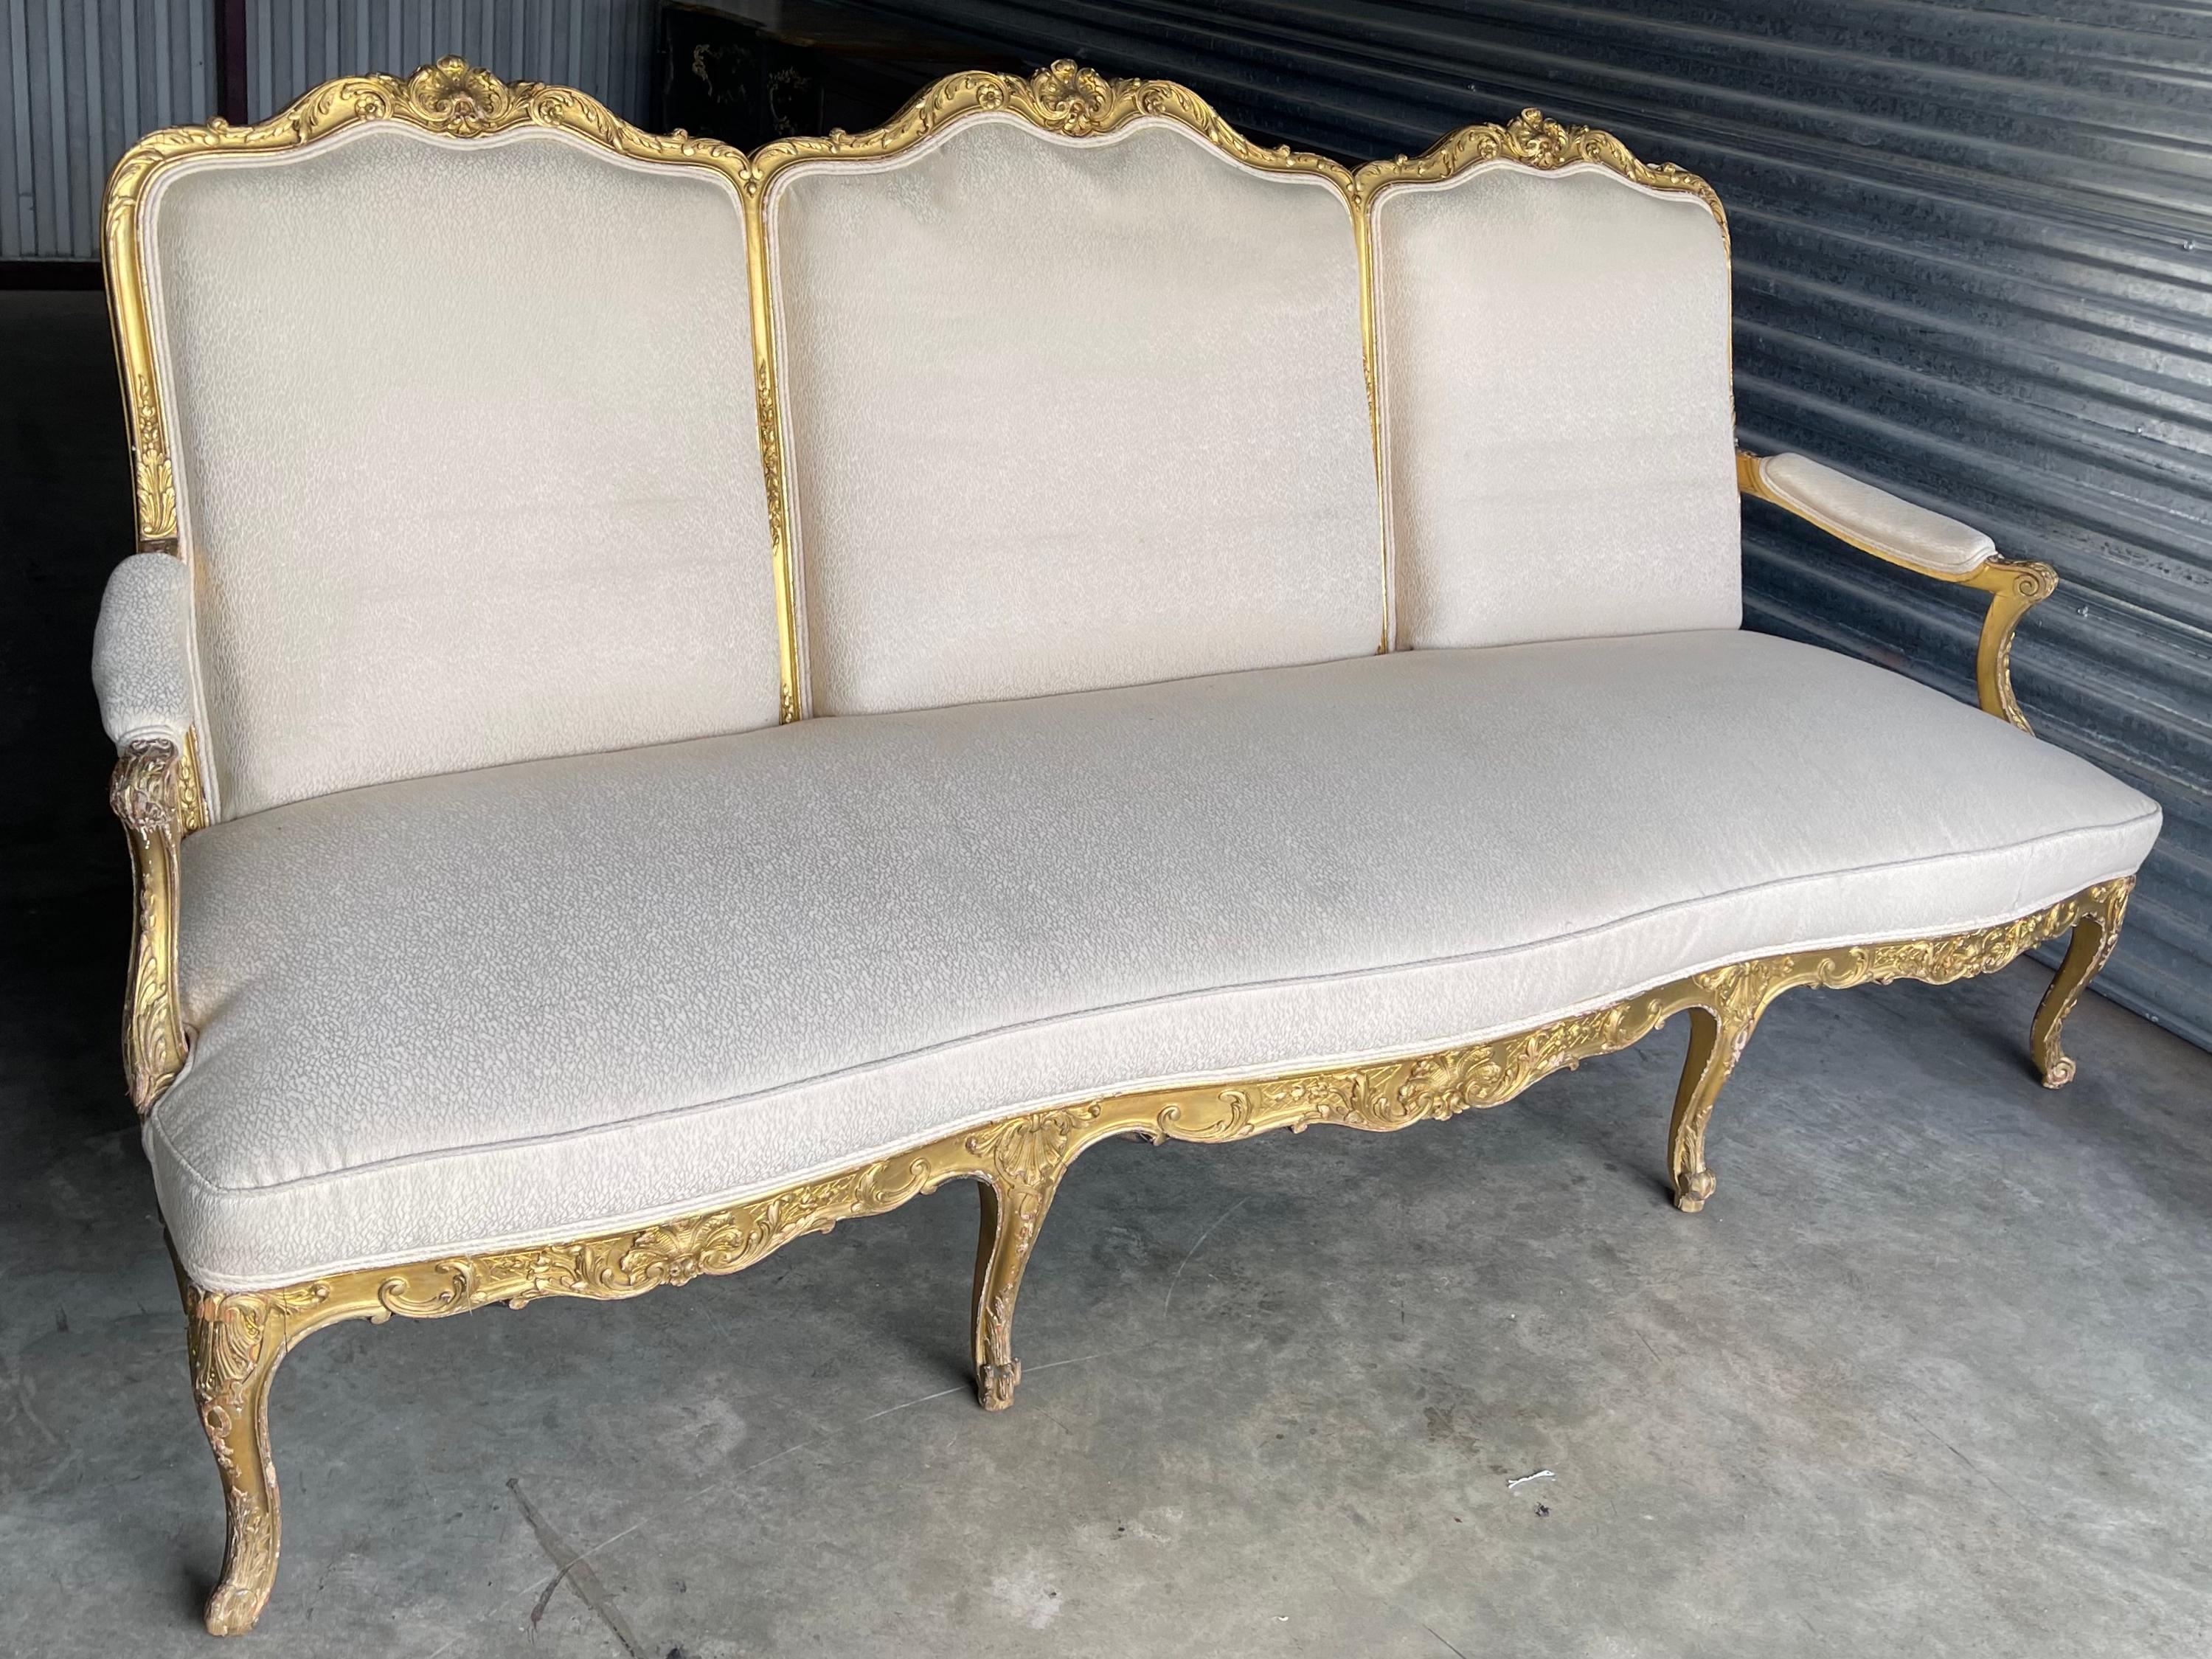 This is a lovely antique French Louis XV style carved giltwood sofa. Note the carved shell back! The vintage fabric does show some wear but is without holes.